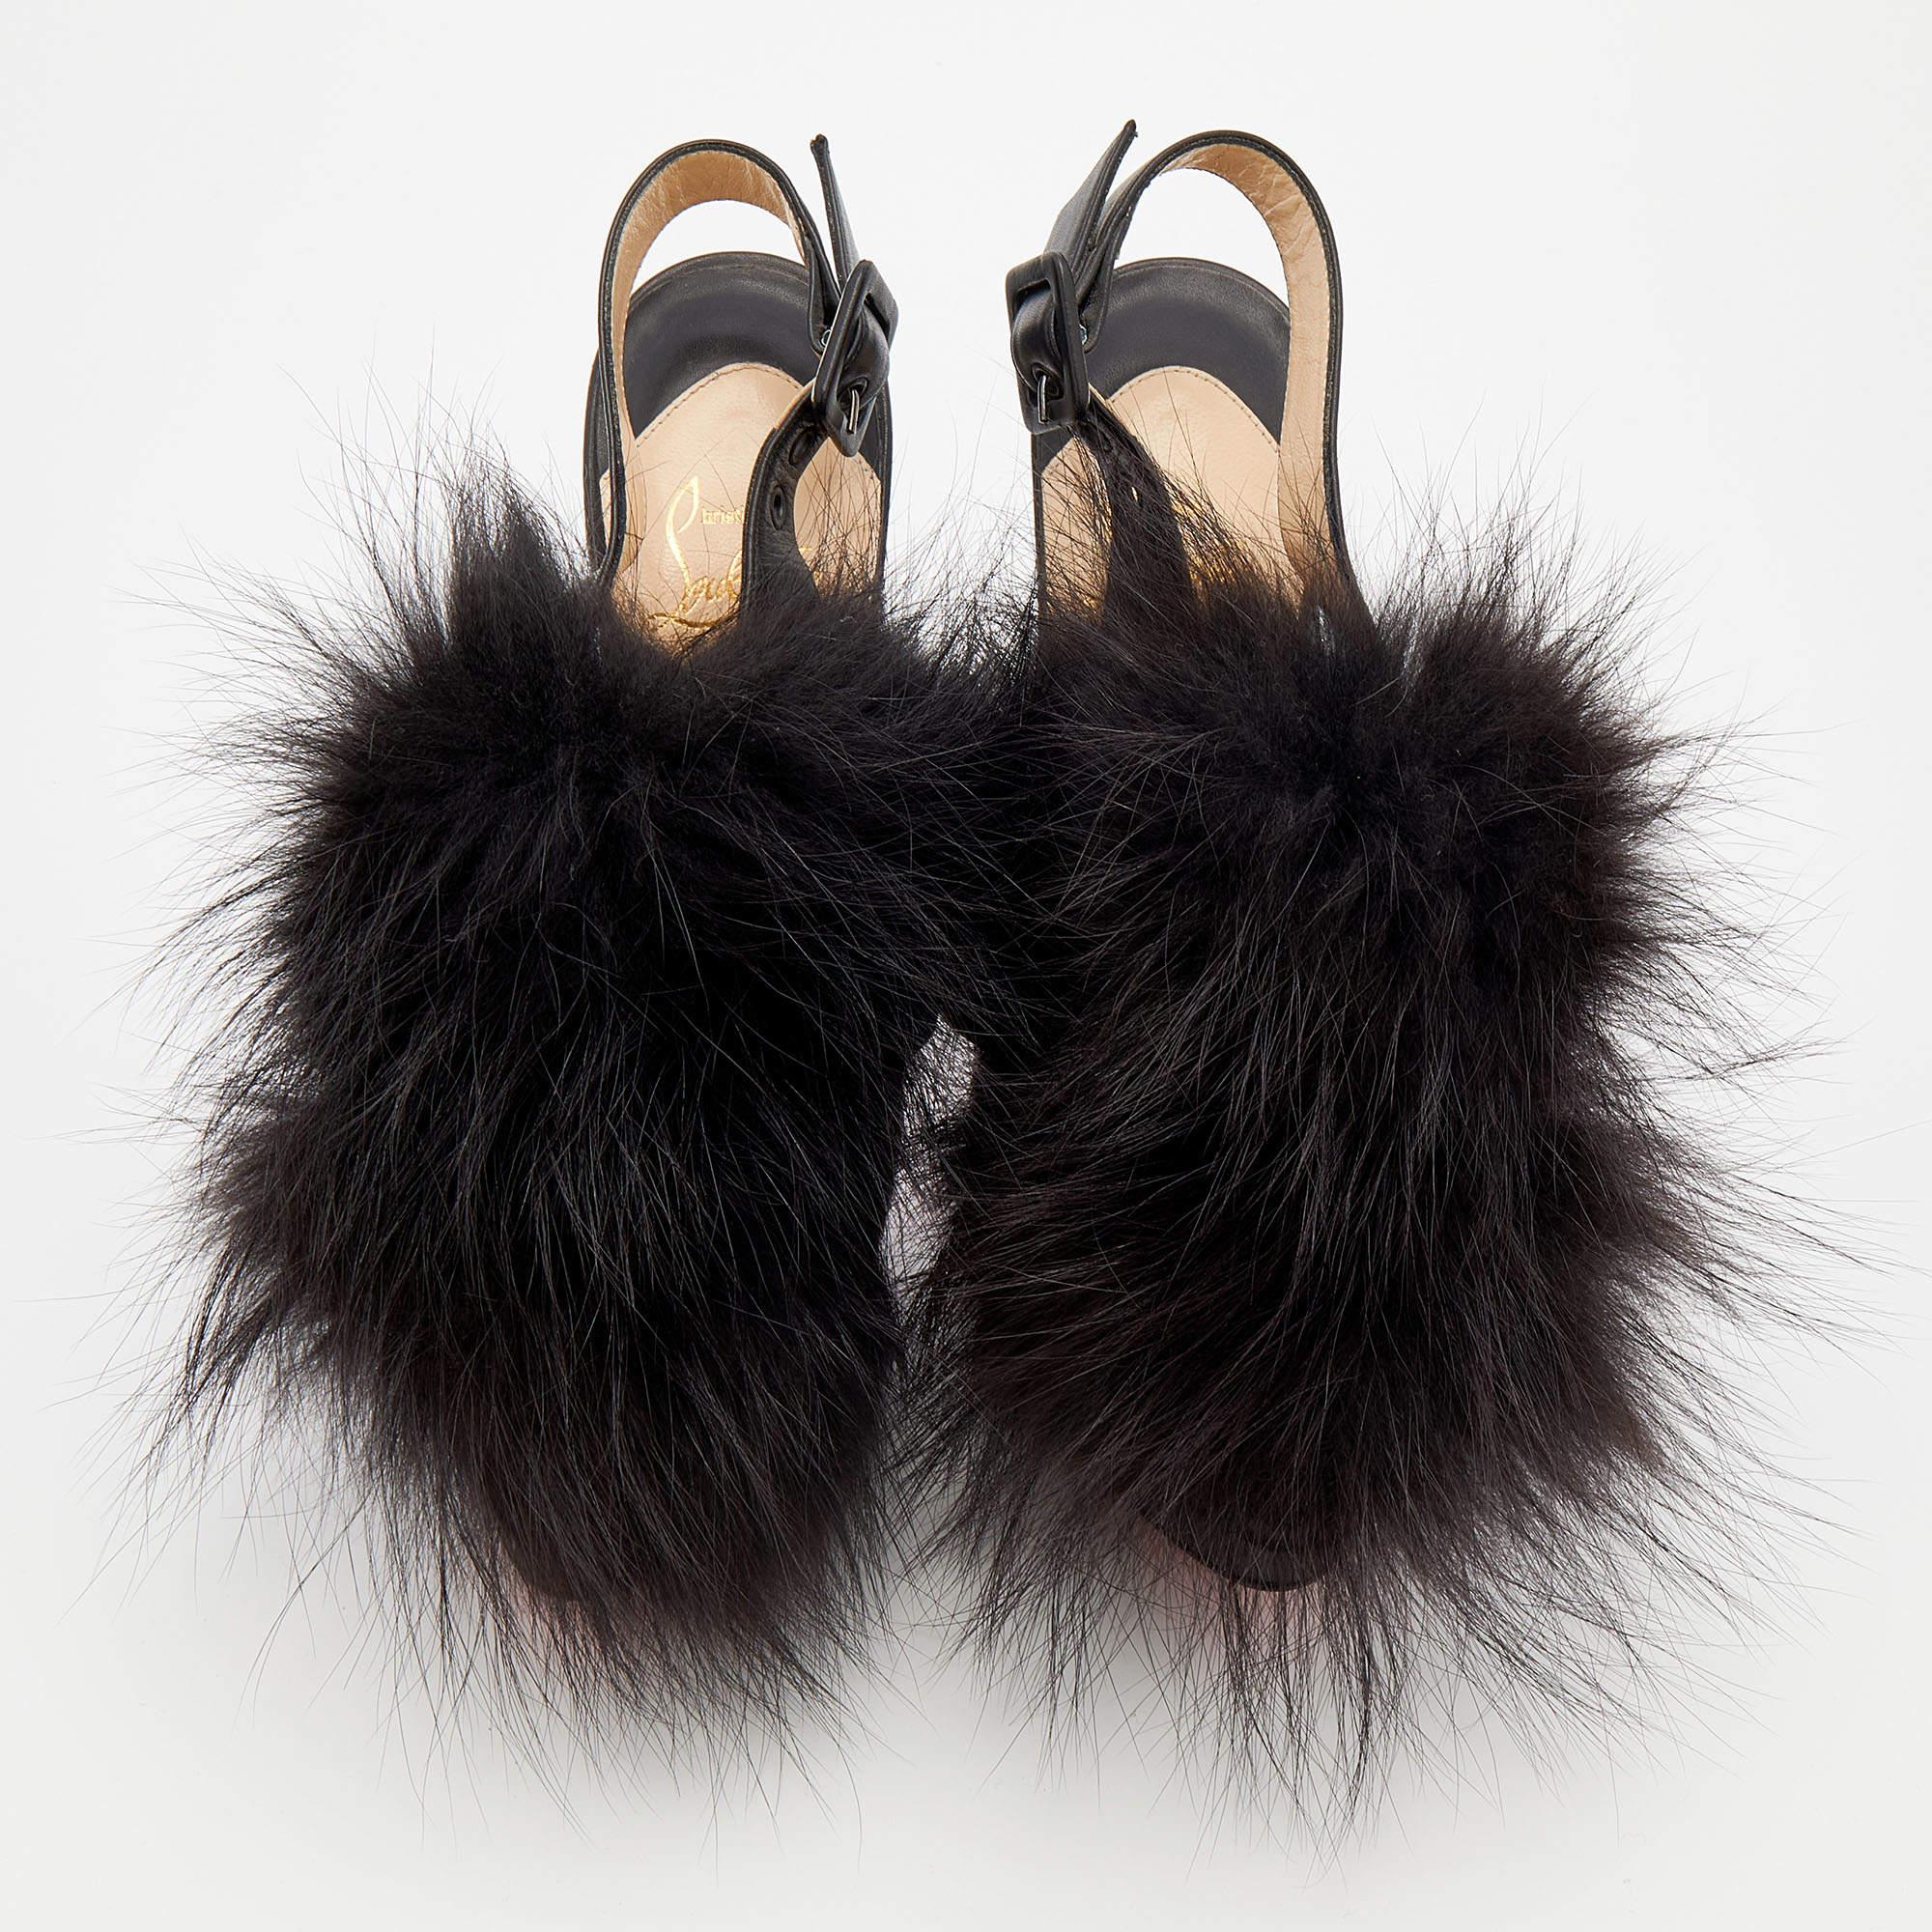 These splendid sandals from Christian Louboutin have an ultra-modern feel with an artistic edge. The leather exterior adorned with extravagant fur trims on the front is visually appealing and the towering 15 cm heels offer loads of glamour. Buckles